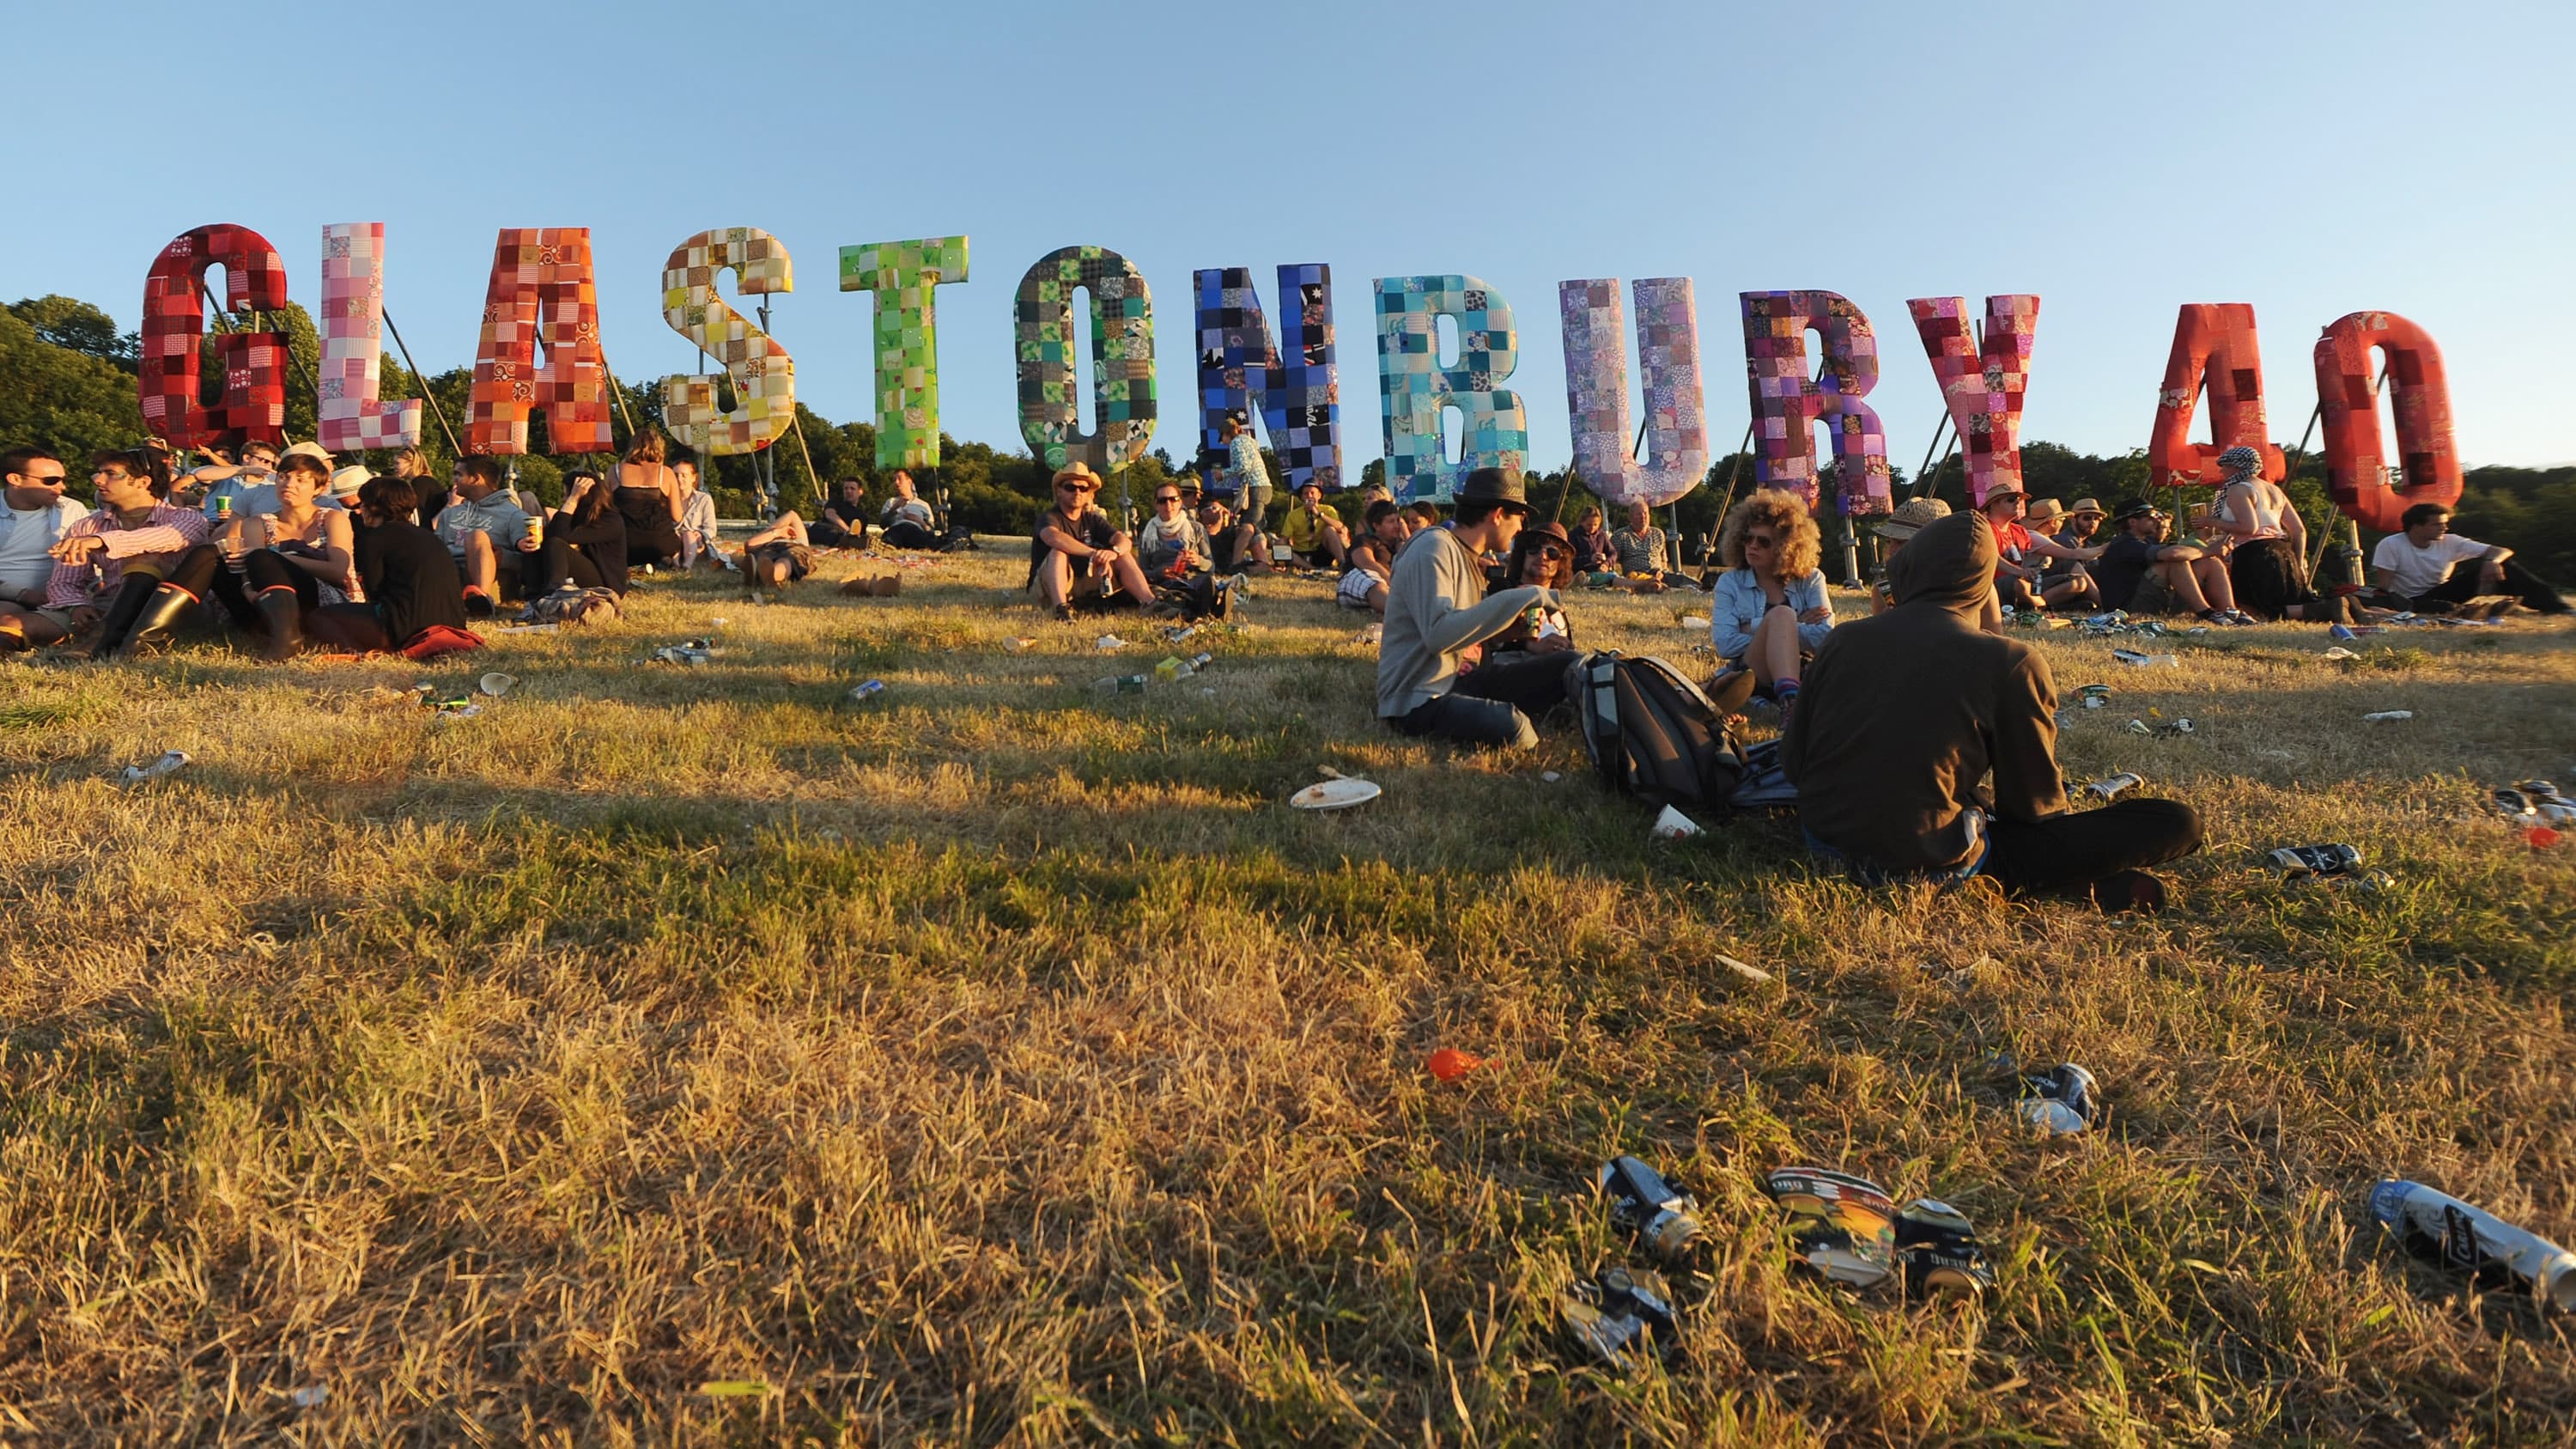 GLASTONBURY, ENGLAND - JUNE 24: Festival goers relax in a field at sunset during Day 1 of the Glastonbury Festival on June 24, 2010 in Glastonbury, England. This year sees the 40th anniversary of the festival which was started by a dairy farmer, Michael Evis in 1970 and has grown into the largest music festival in Europe. (Photo by Ian Gavan/Getty Images)